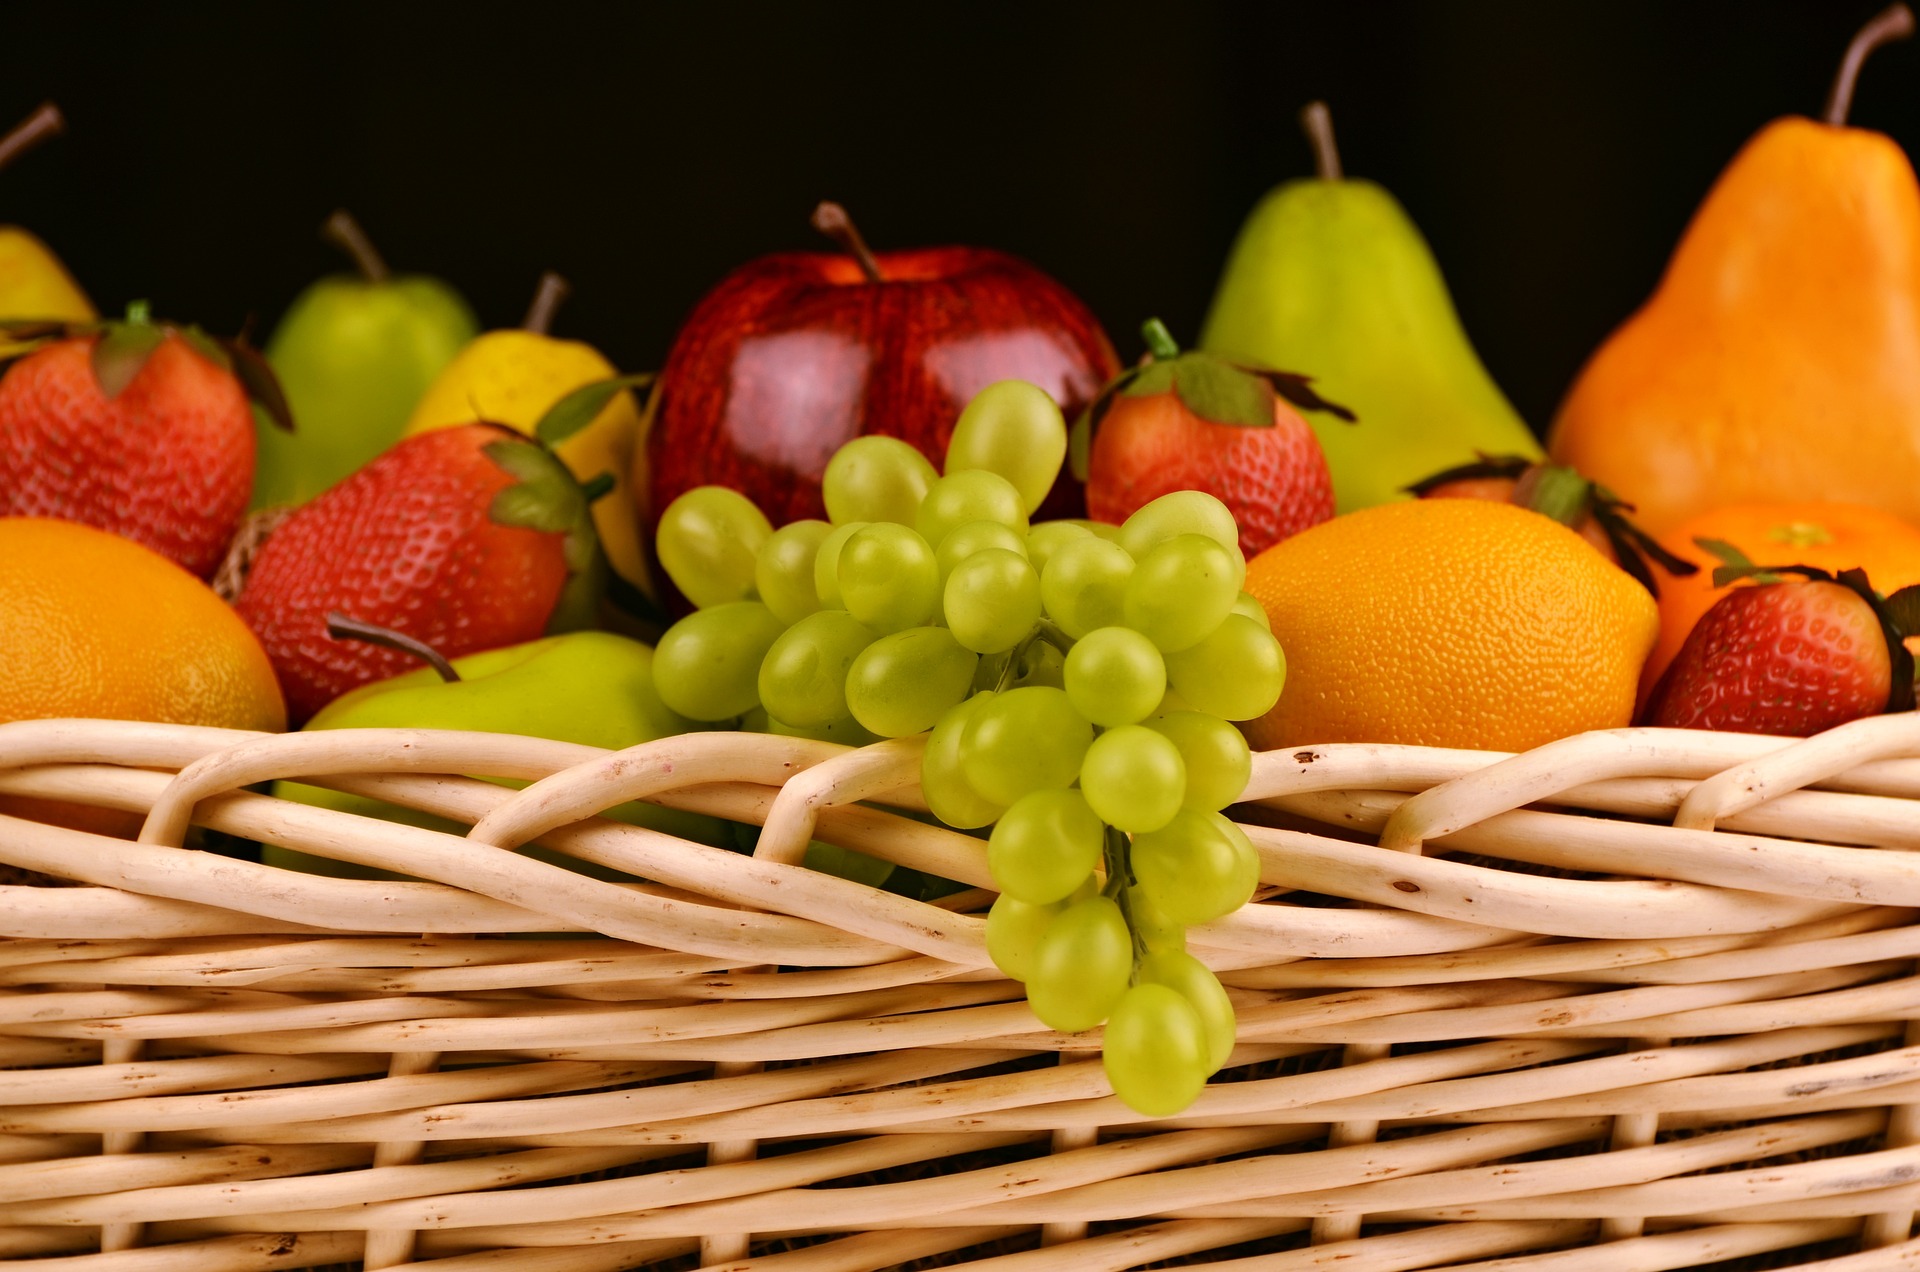 Our 7 days Fruit Basket Plan – Everything You Need To Know